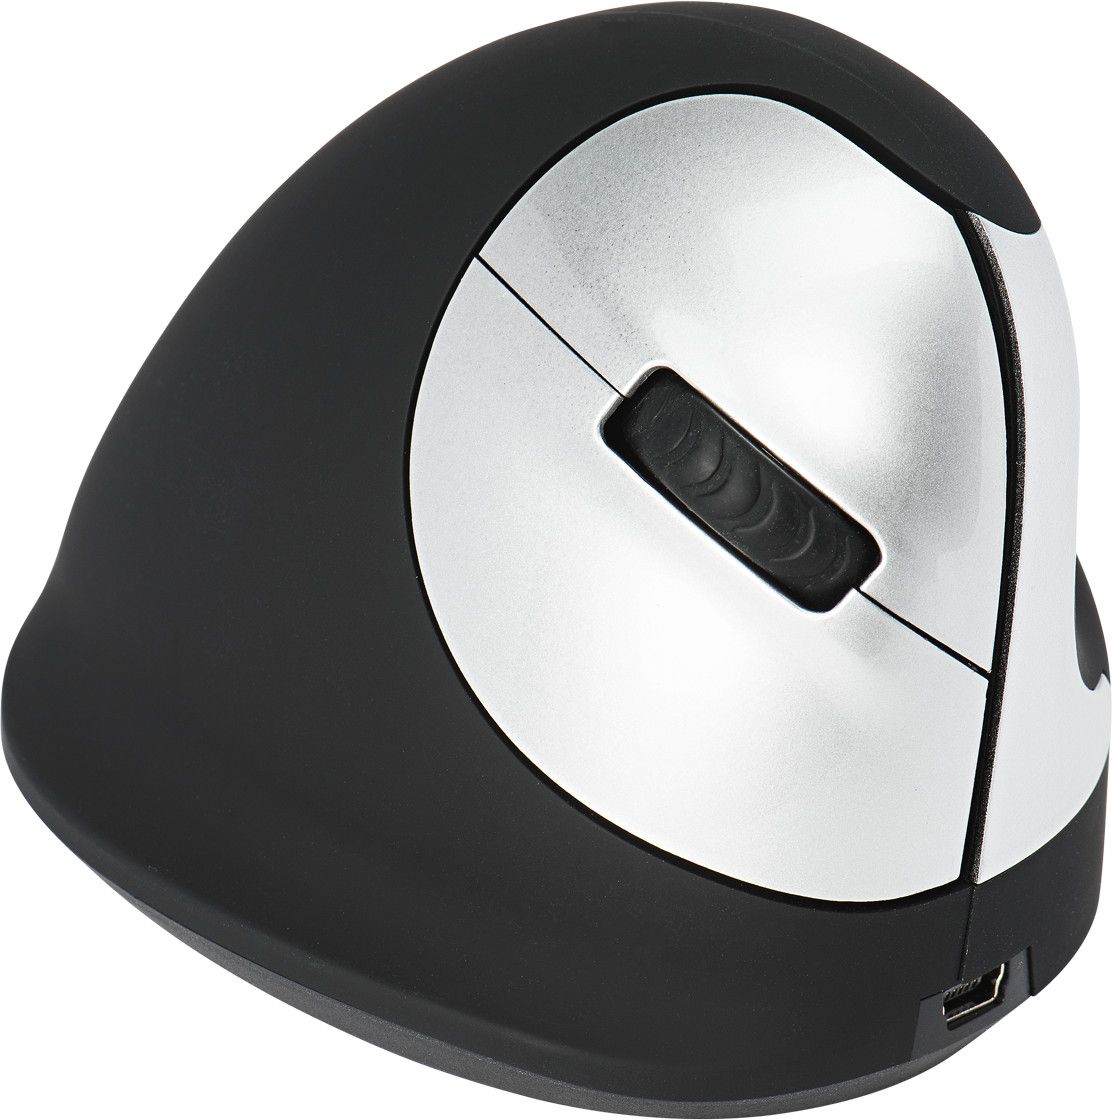 R-Go Tools HE Mouse Wireless Vertical Right - Large